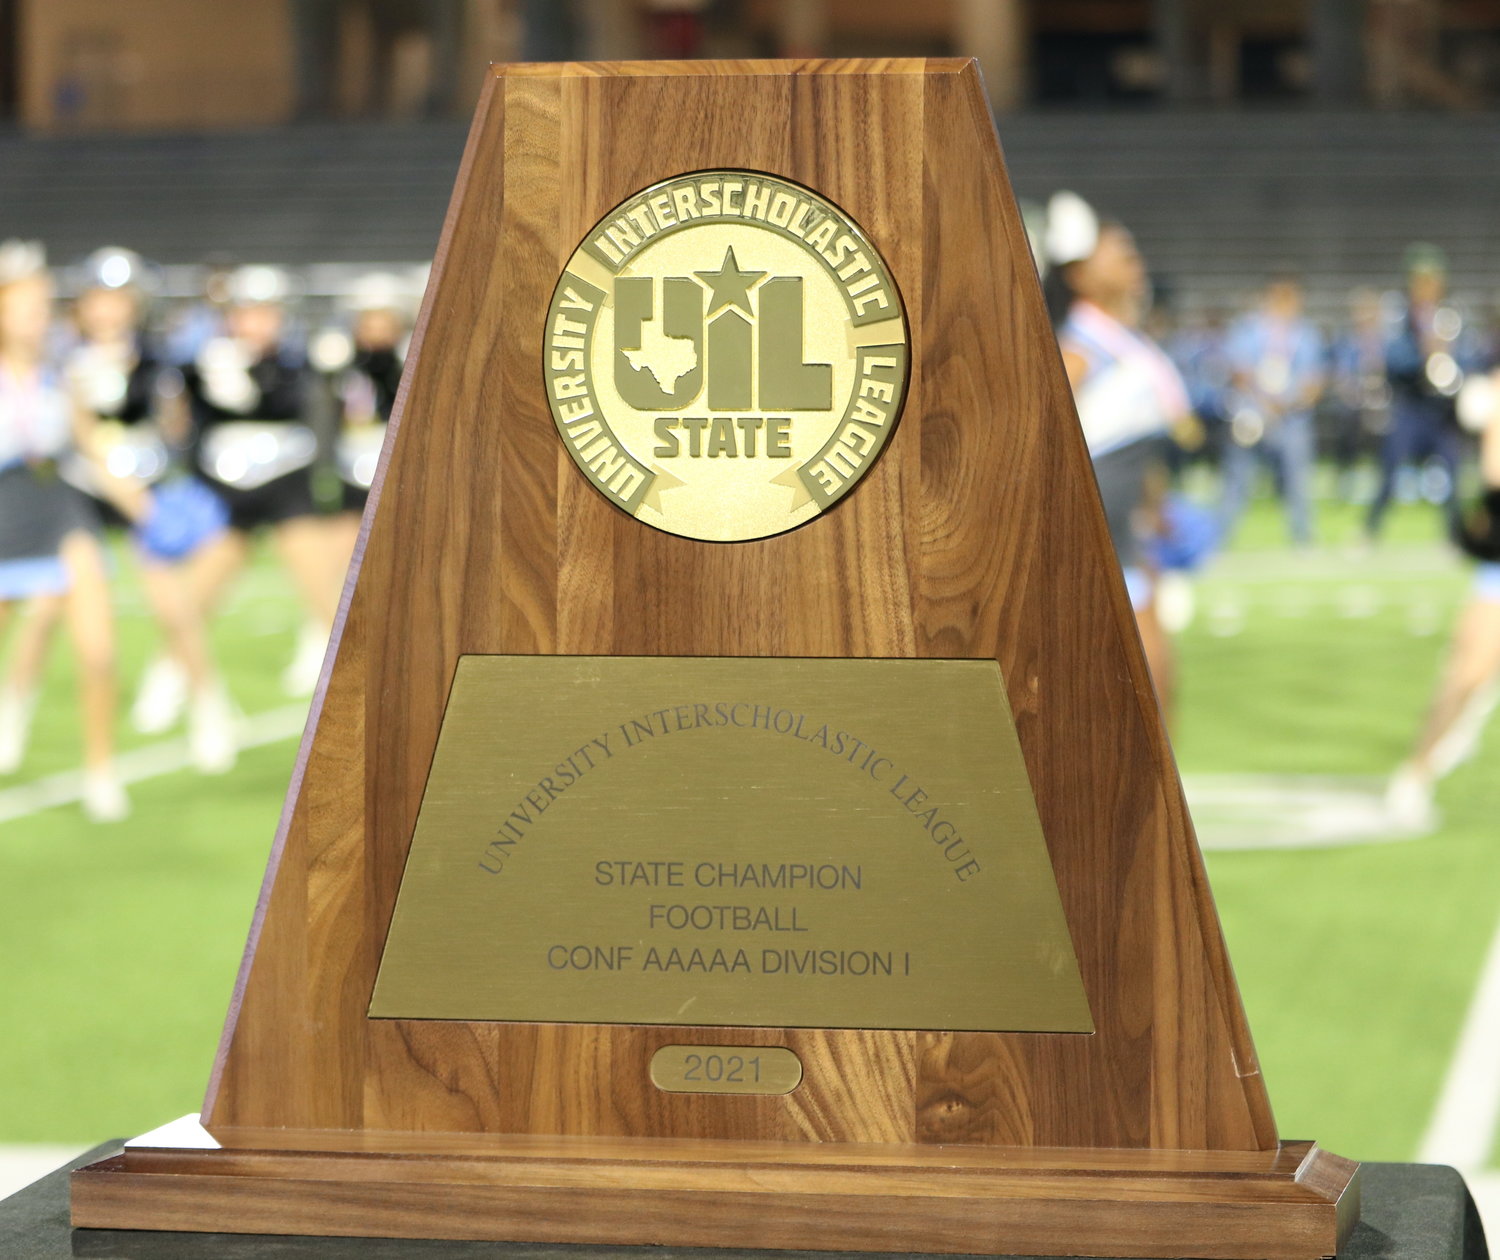 The UIL 2021 state championship trophy was on display during Wednesday's Paetow State Championship celebration at Legacy Stadium